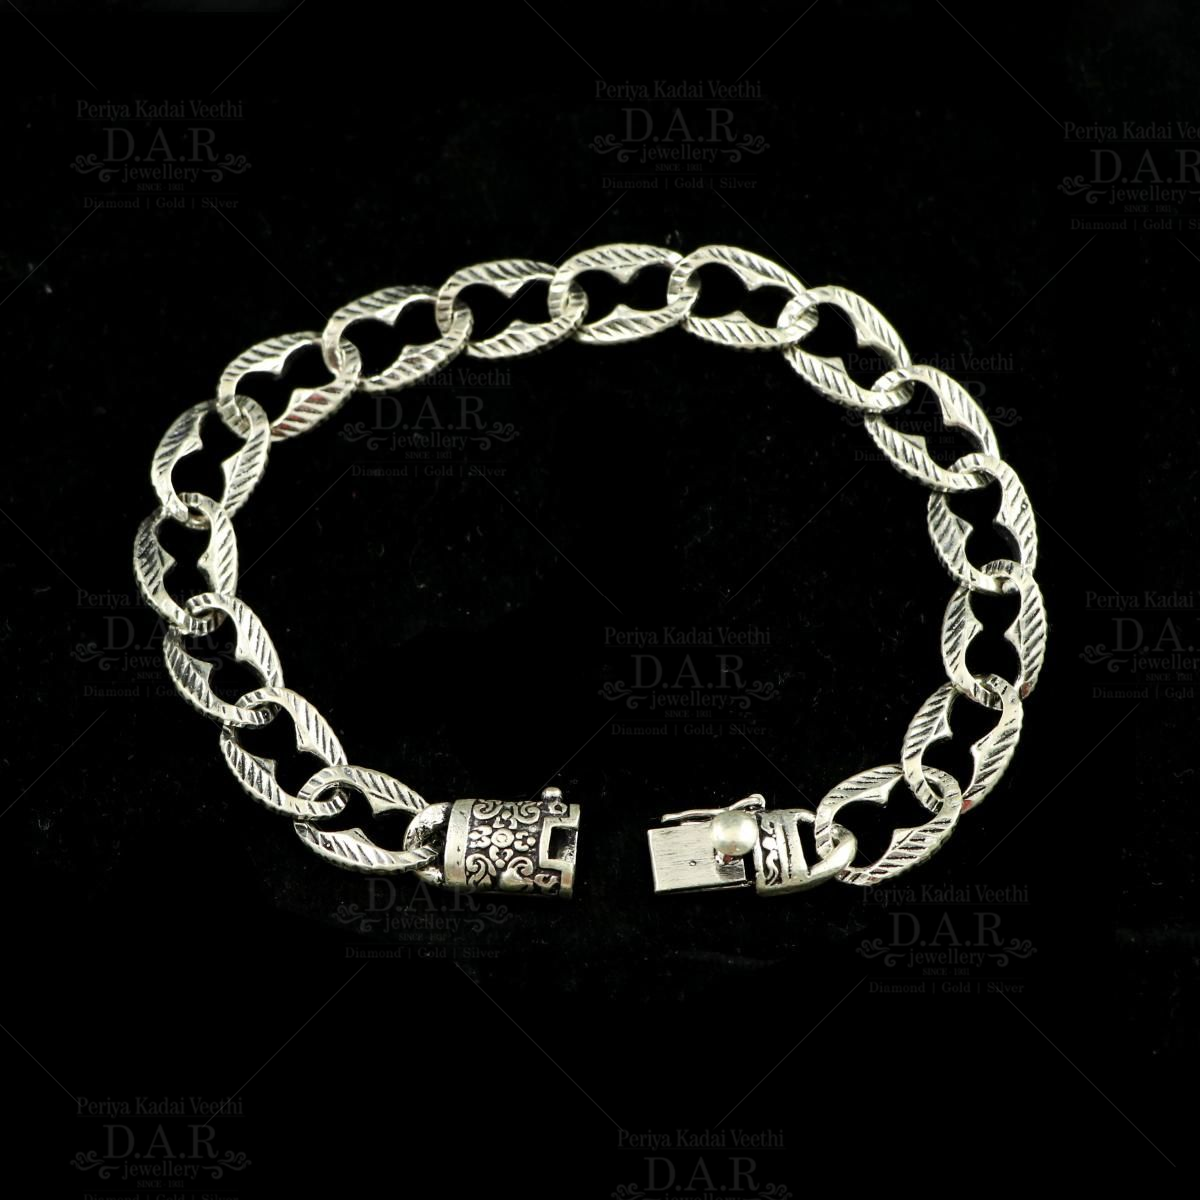 Stylish Stainless Steel Link Bracelet With 15mm Wide Silver Design,  Polished Chain For Men, 7 11 Inch Width Perfect For Miami Cuban Curb Style  Jewelry From Pattymills, $12.62 | DHgate.Com